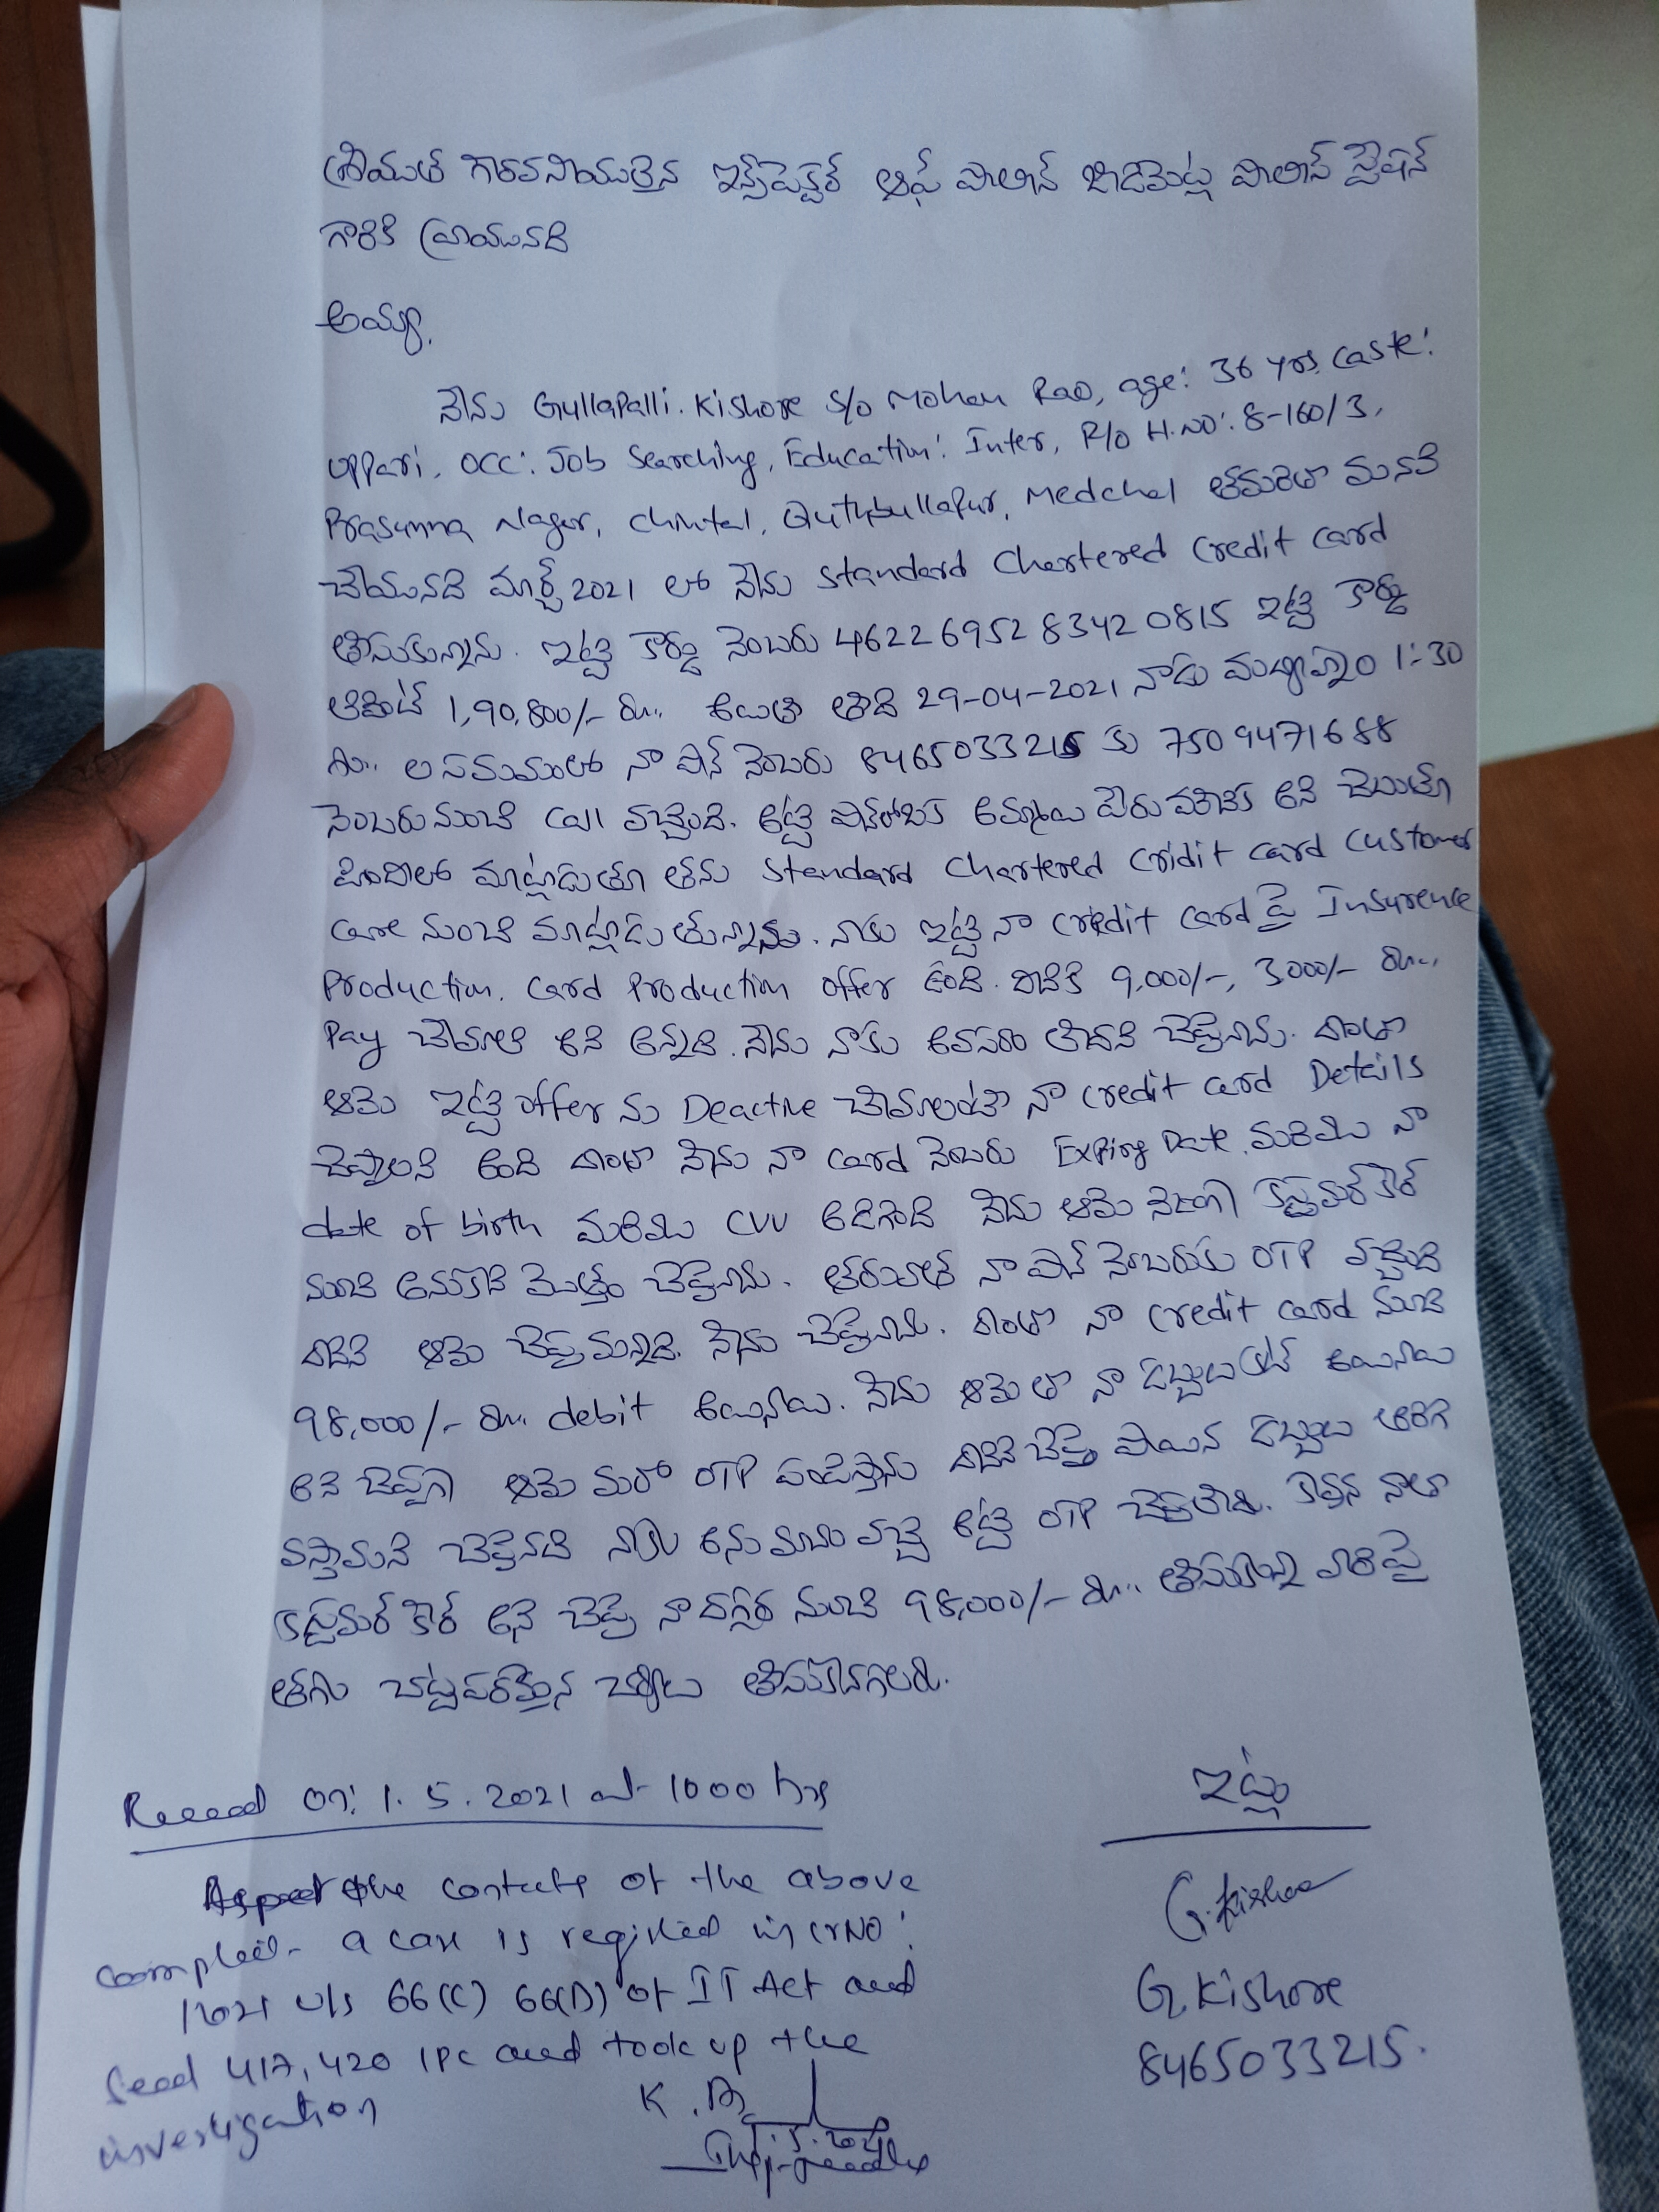 Complaint letter made by the victim